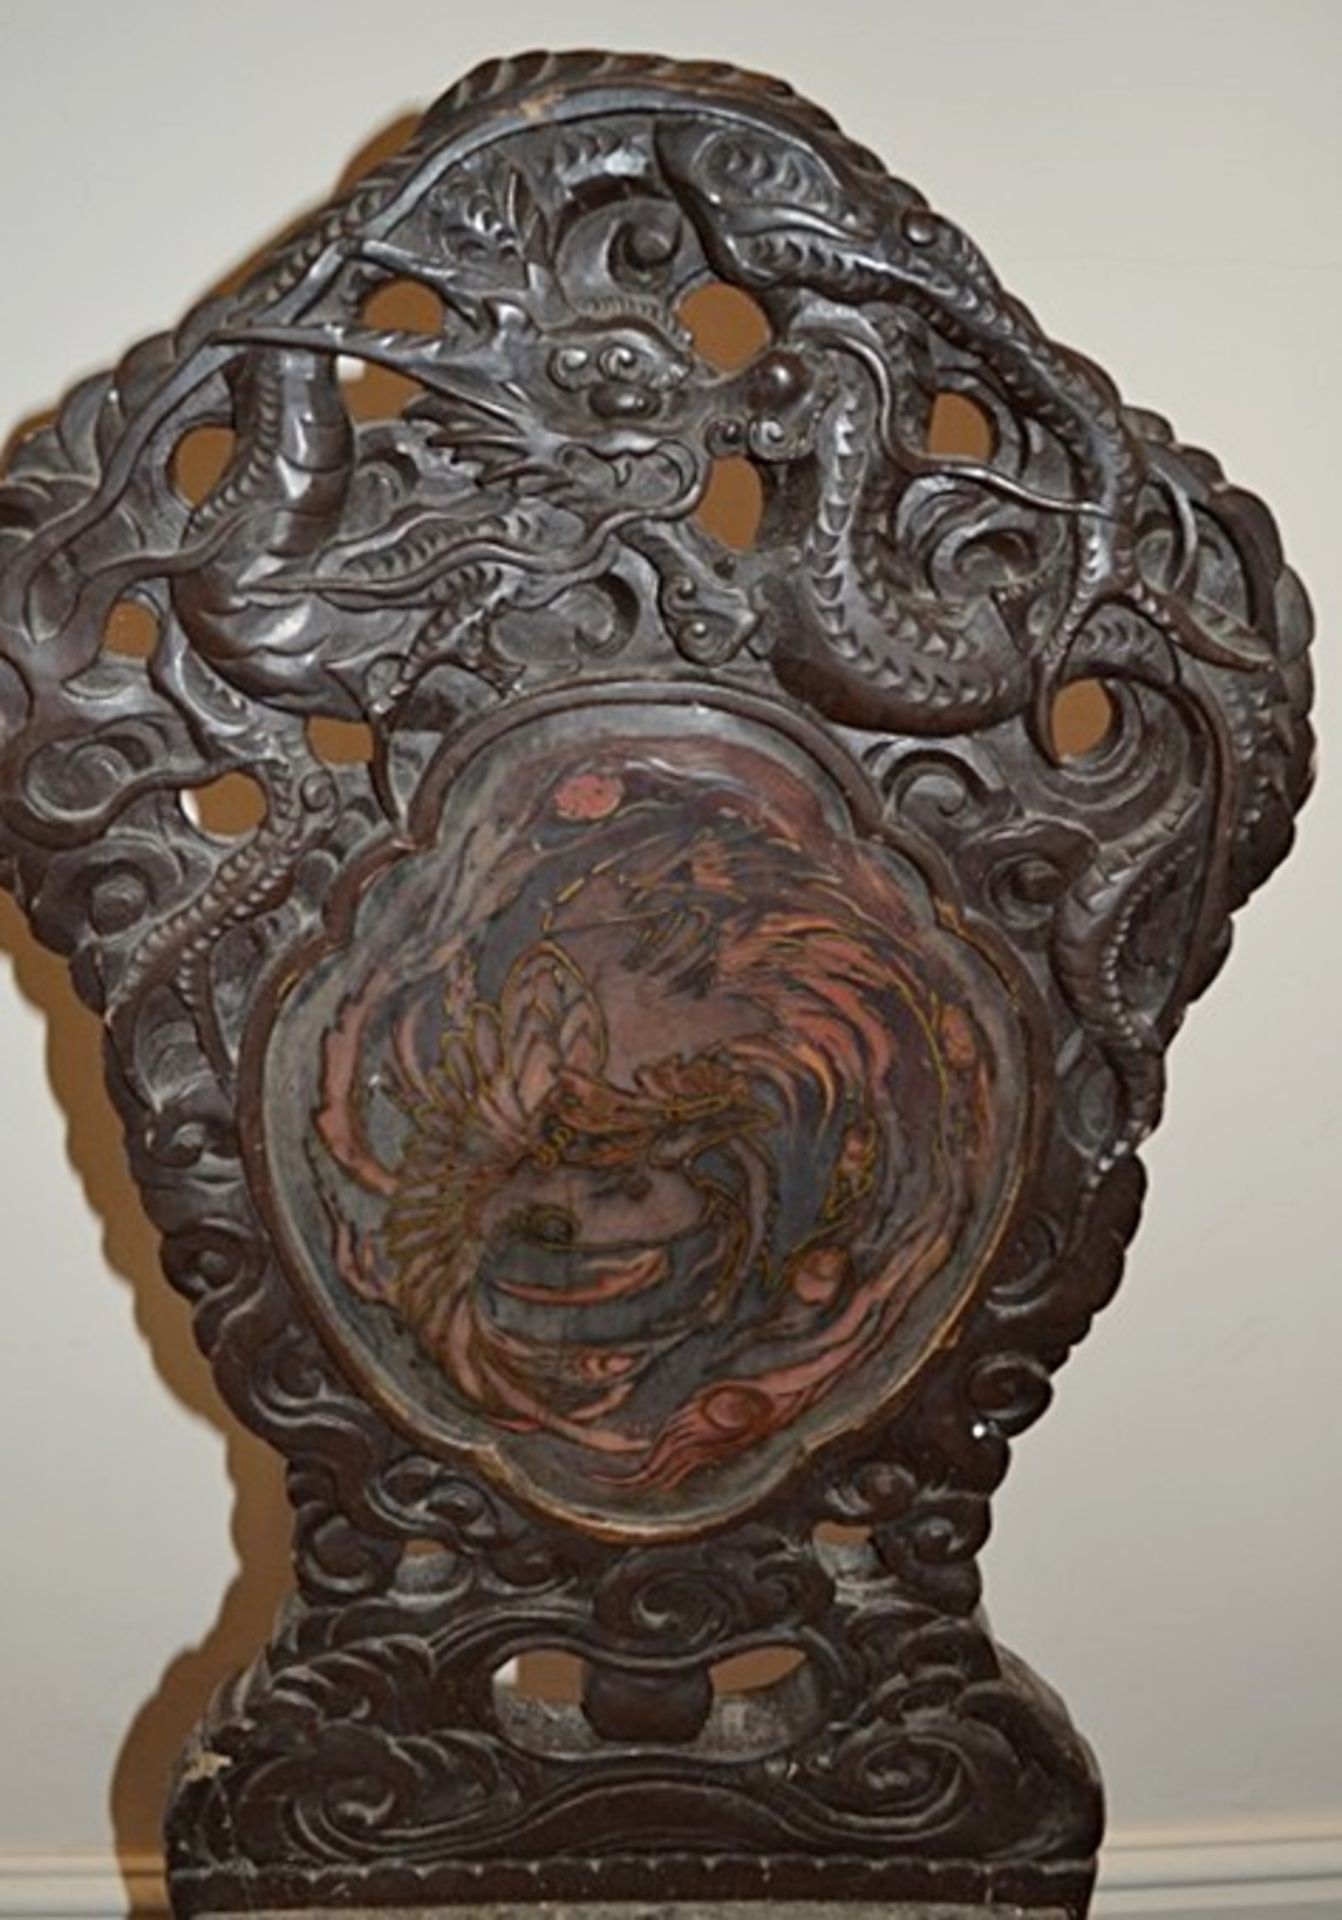 1 x Handcarved Antique Solid Wood Chinese Chair - Featuring Carved Dragons And Inlayed Design On - Image 5 of 6